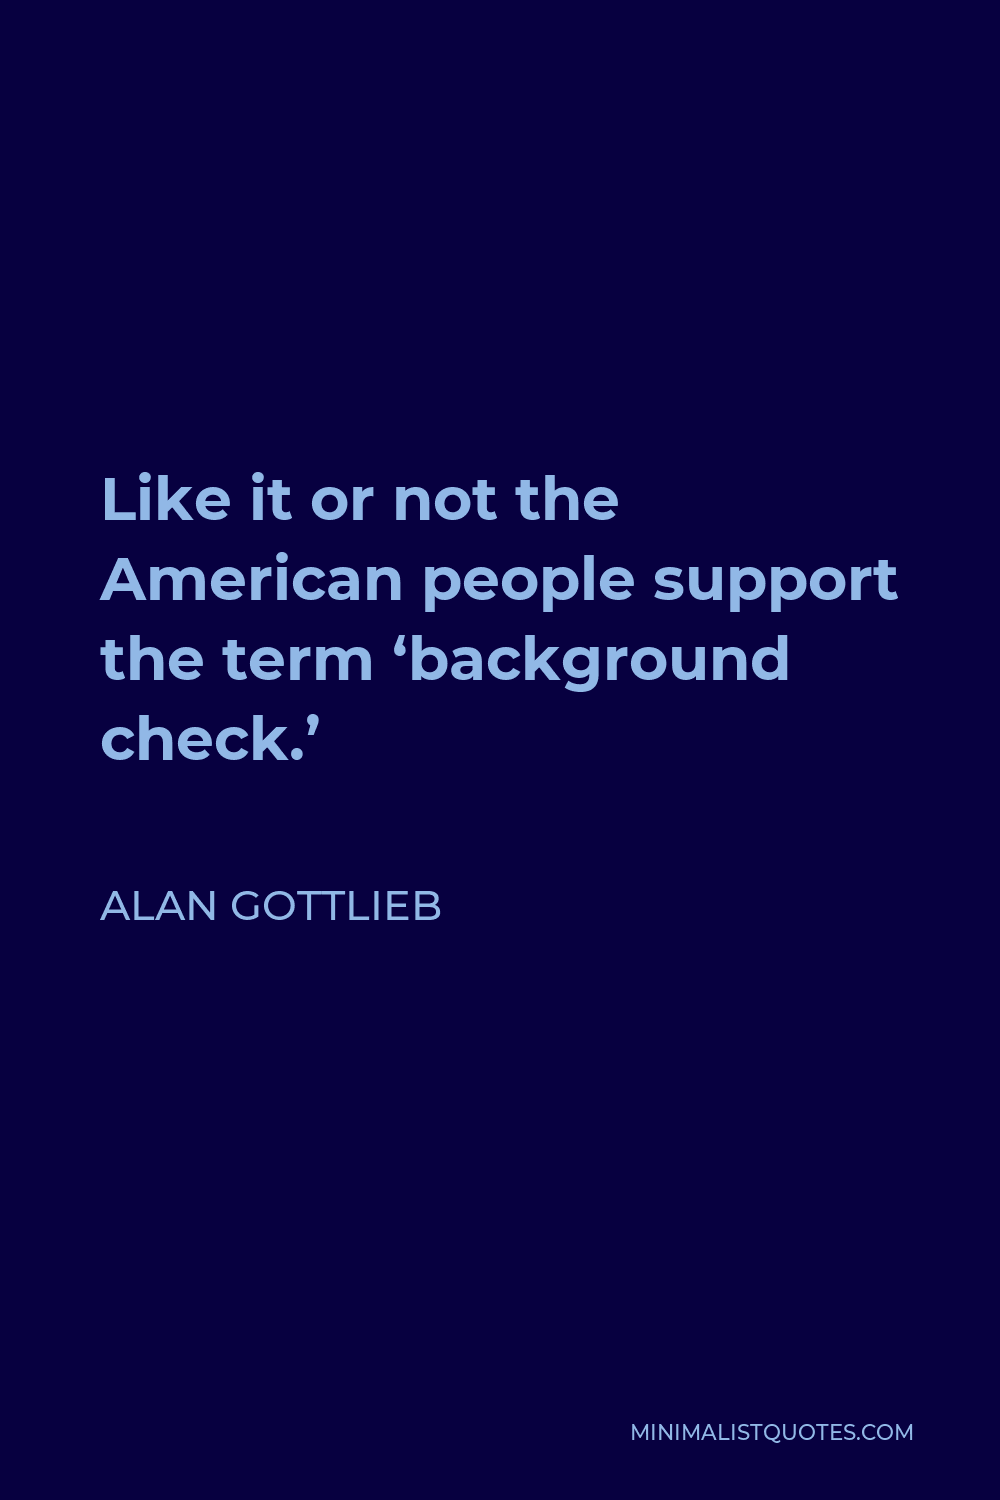 Alan Gottlieb Quote - Like it or not the American people support the term ‘background check.’